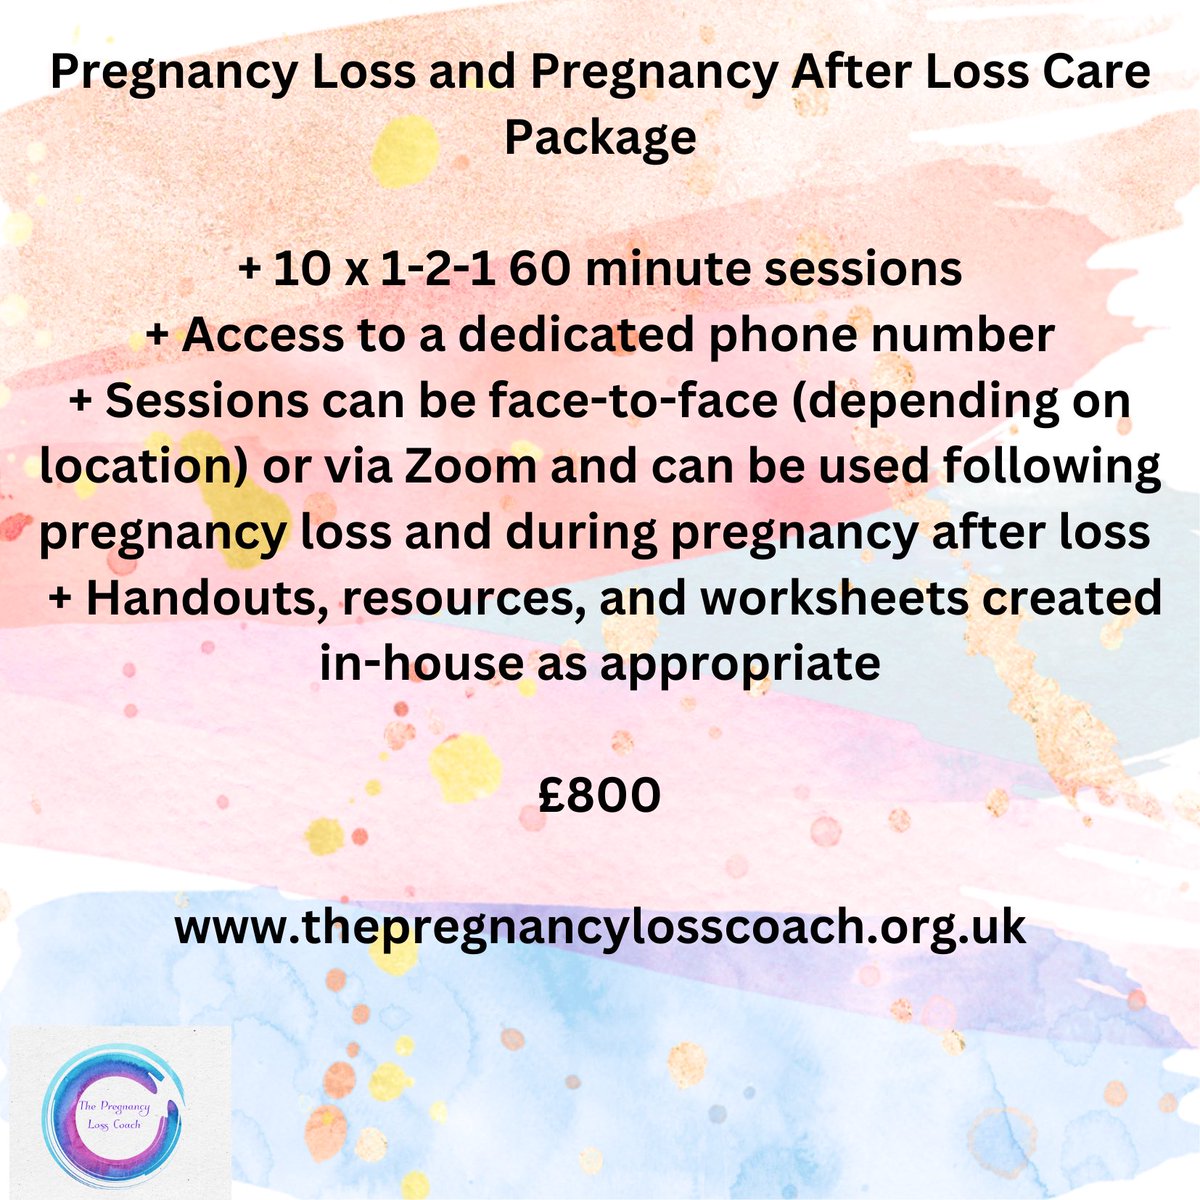 #pregnancyloss #pregnantafterloss #pregnancyafterloss #babyloss #tfmr #ectopicpregnancy #miscarriage #missedmiscarriage #chemicalpregnancy #molarpregnancy #recurrentmiscarriage #bereavement #loss #grief #babylossawareness #BrumHour